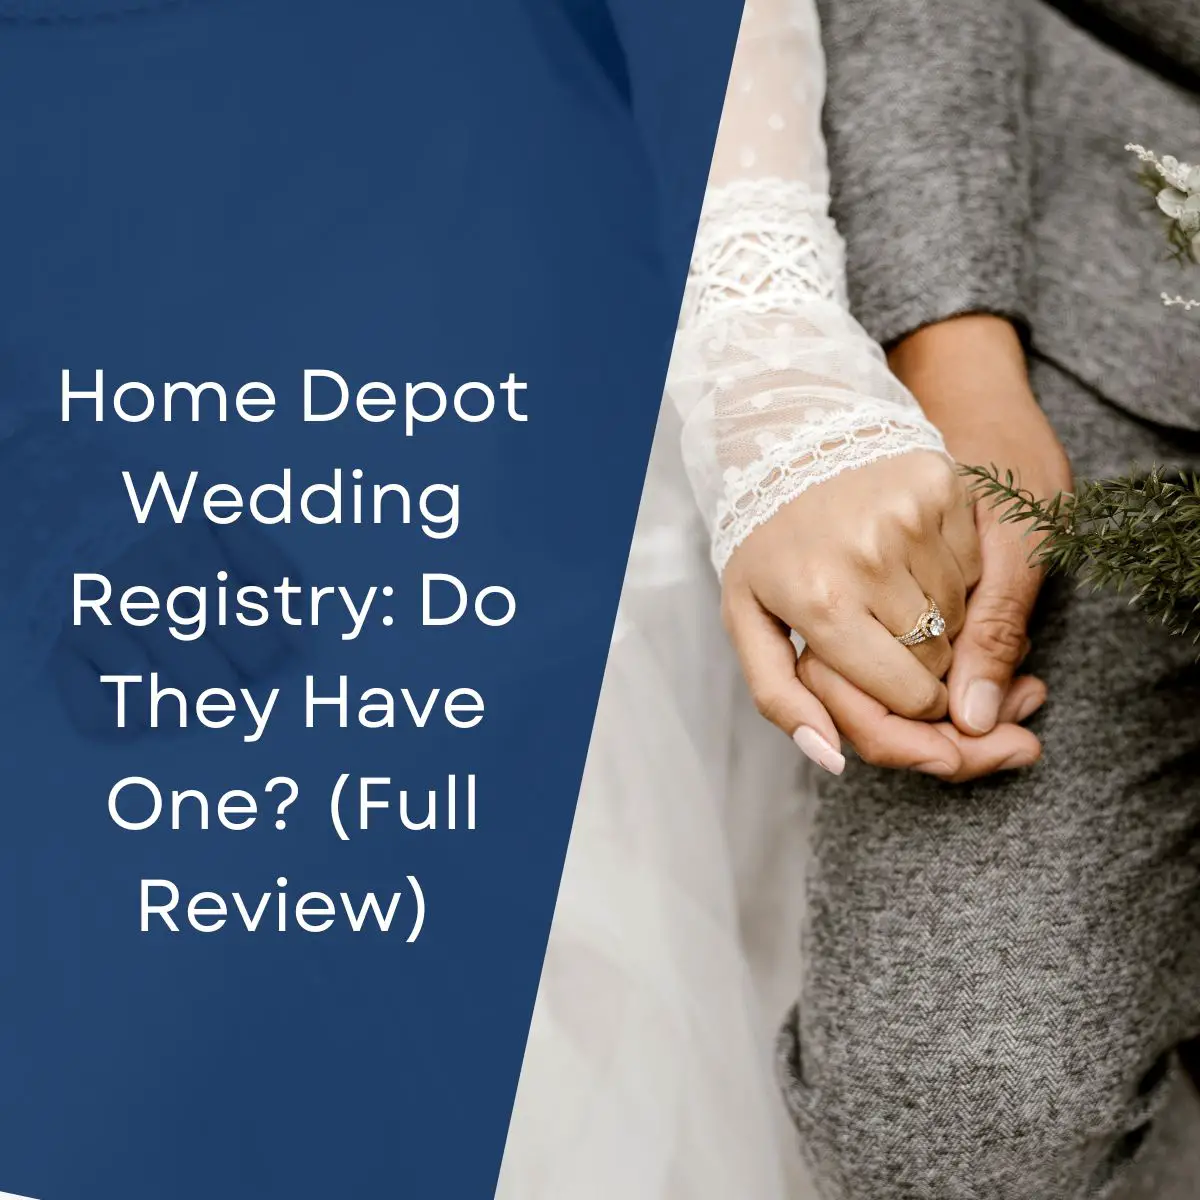 Home Depot Wedding Registry: Do They Have One? (Full Review)